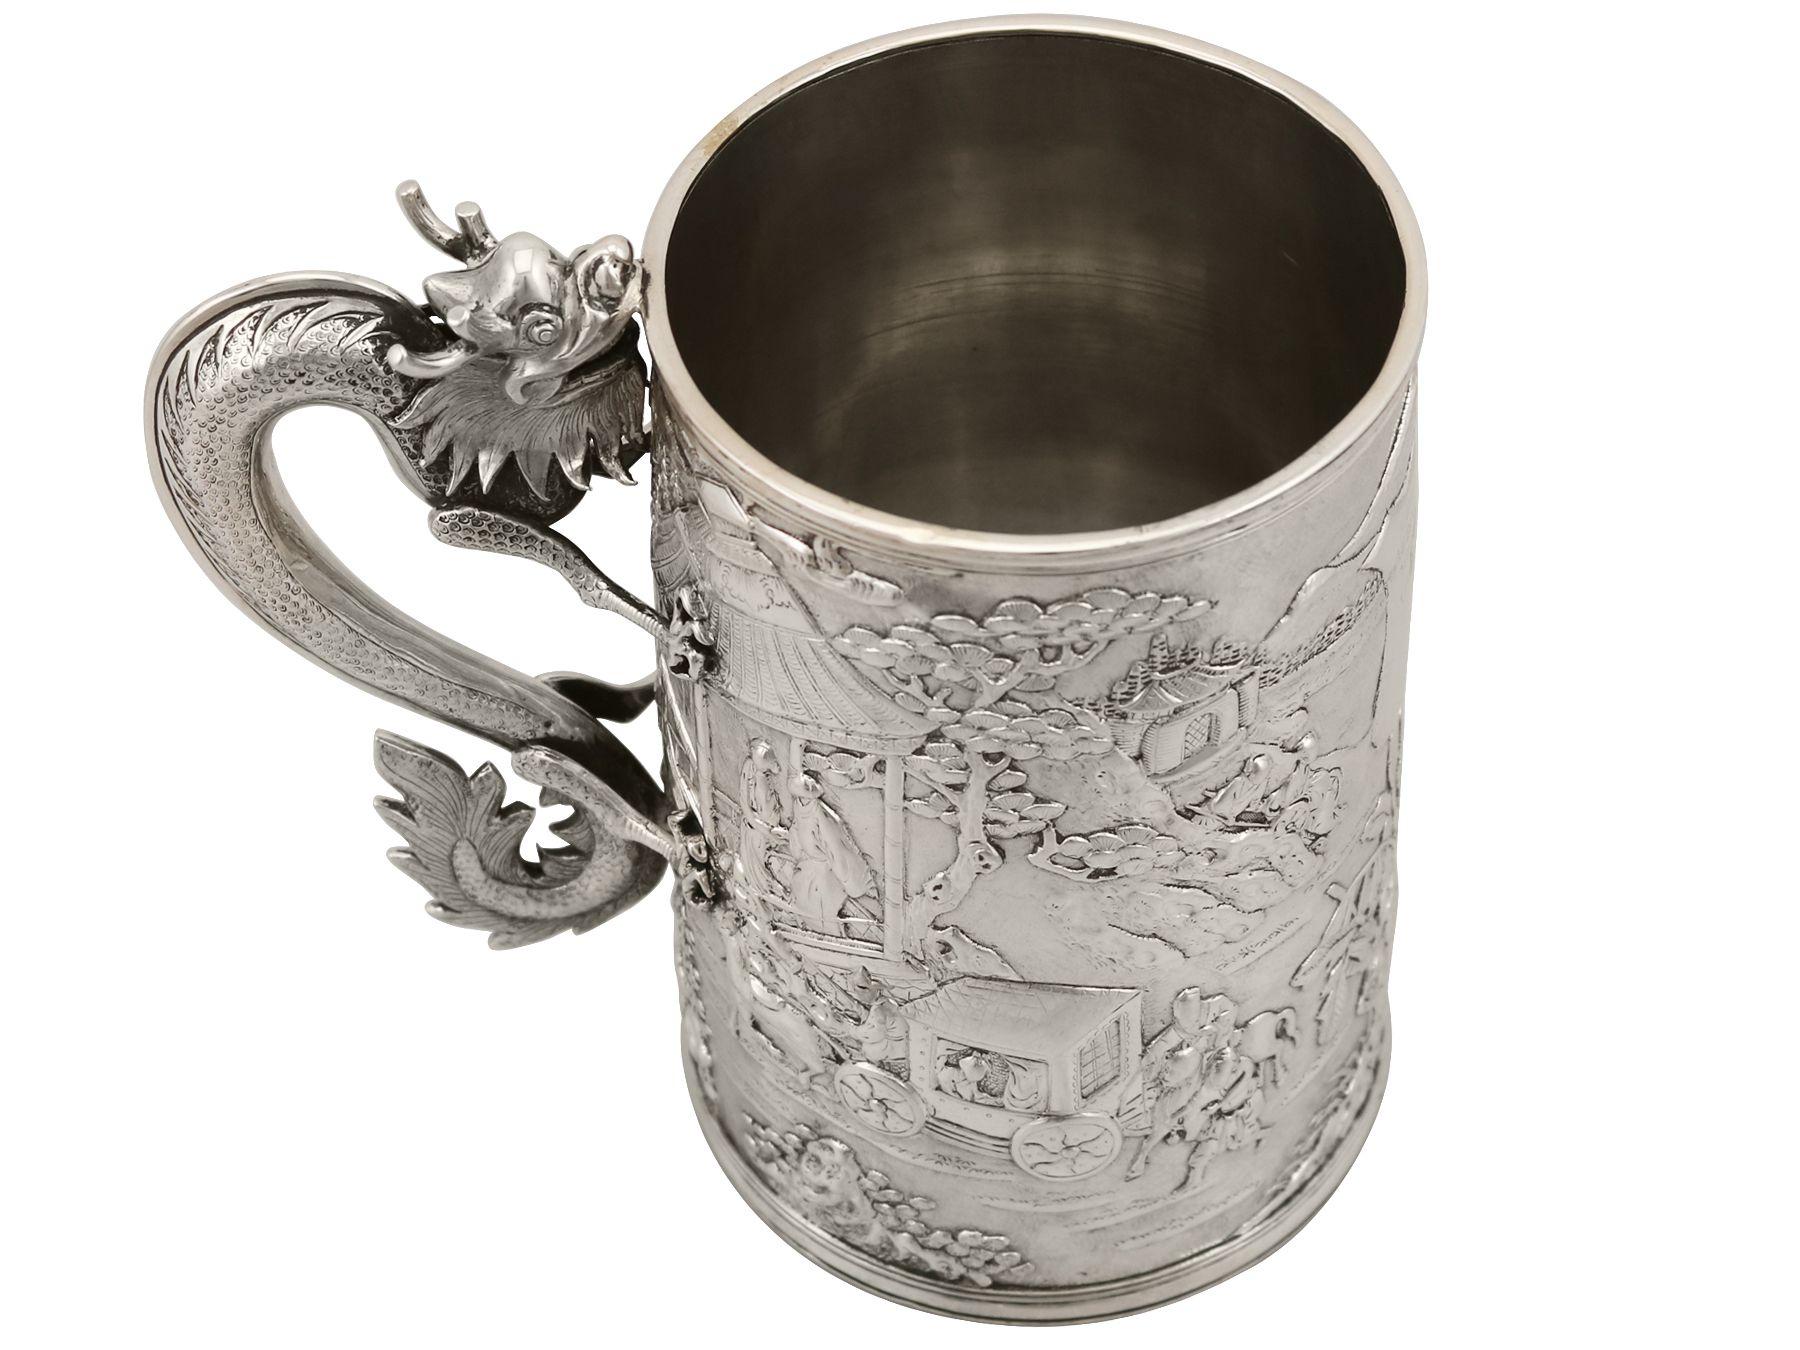 An exceptional, fine, large and impressive Chinese Export silver mug; an addition to our oriental silverware collection

This exceptional and large antique Chinese Export silver mug has a tapering cylindrical form.

The surface of this mug is